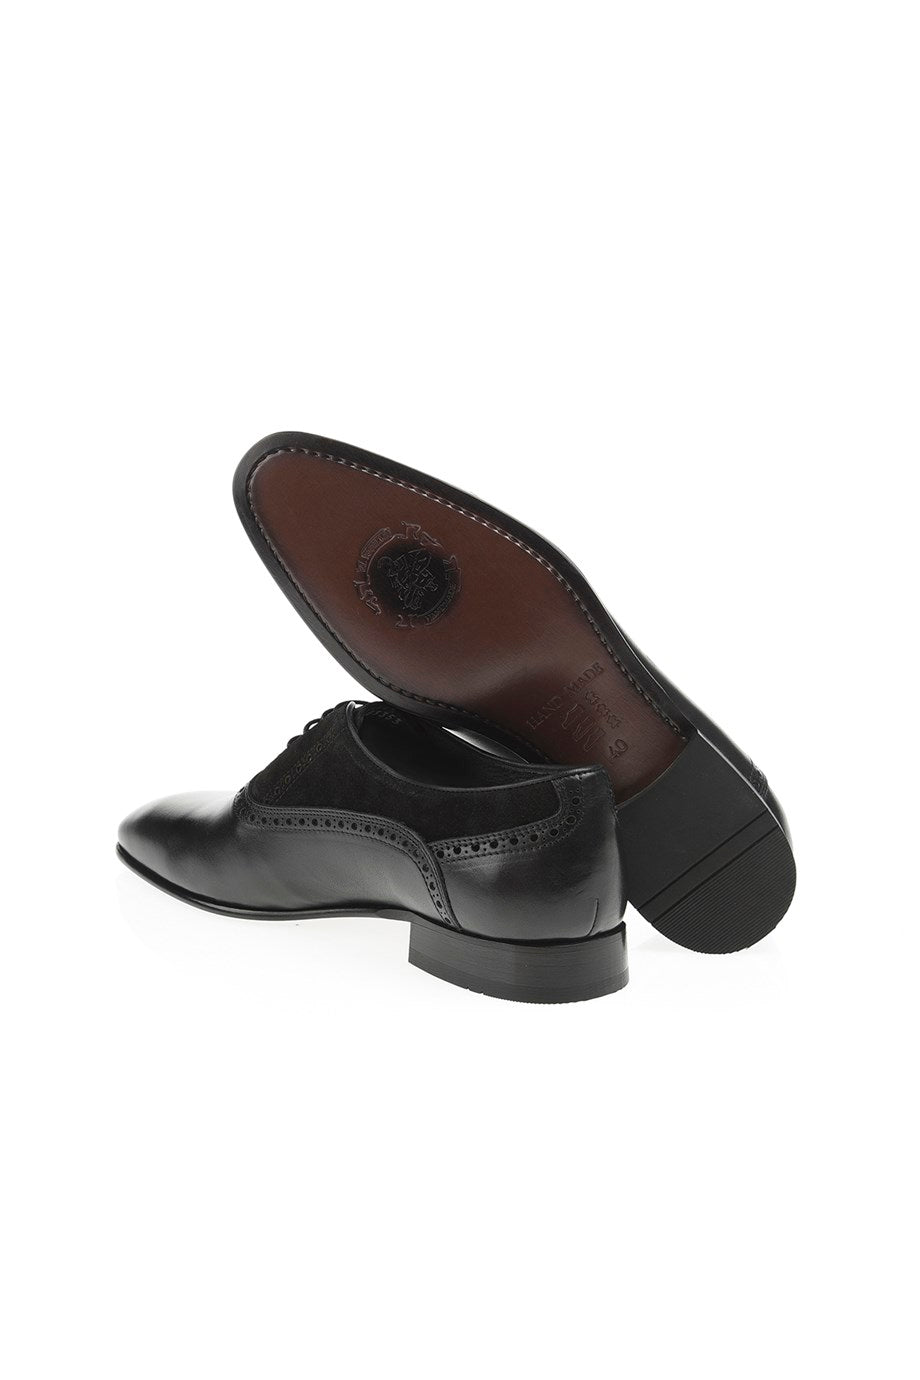 Special Design Leather Sole Classic Shoes - MENSTYLEWITH